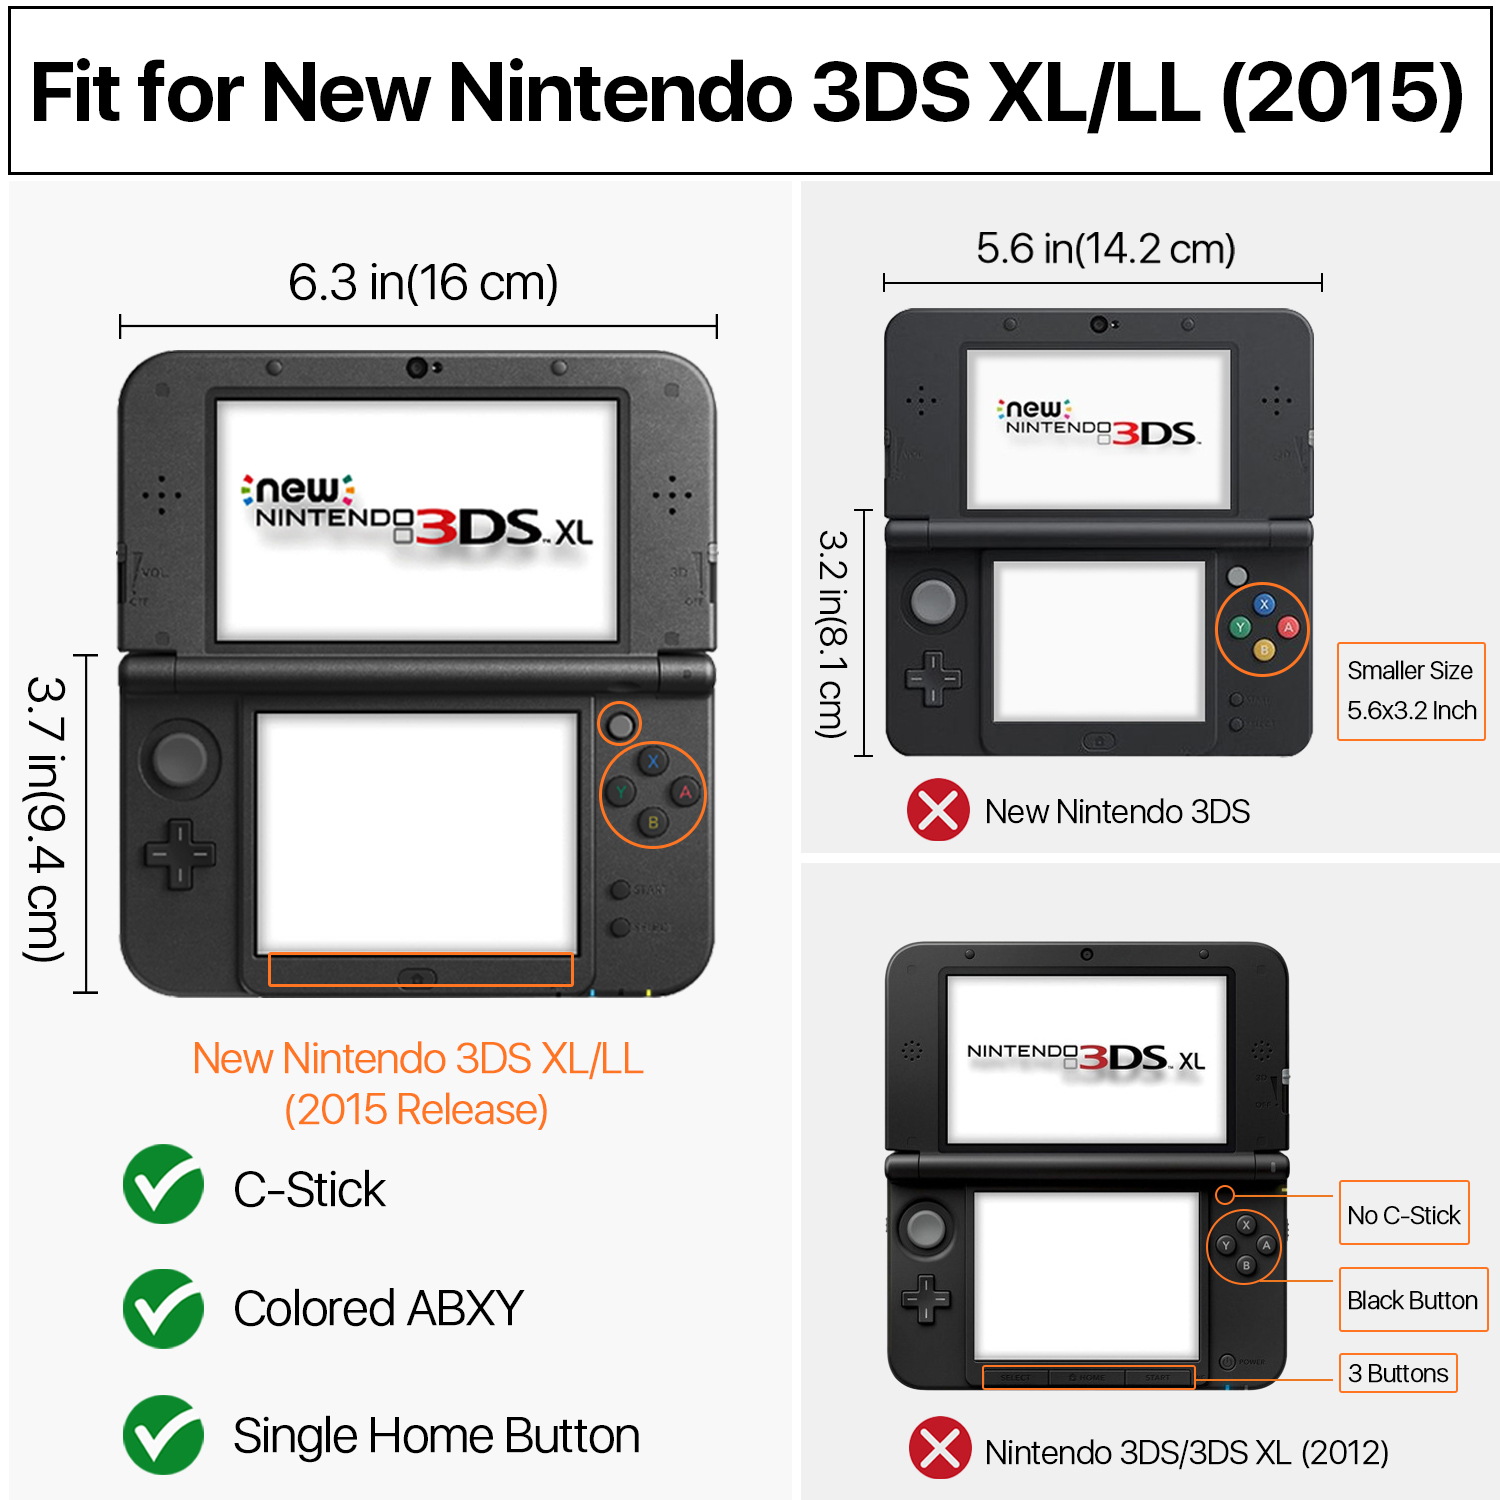 Specially designed for New 3DS XL LL (2015 Model) ONLY. Please check compatibility before purchase